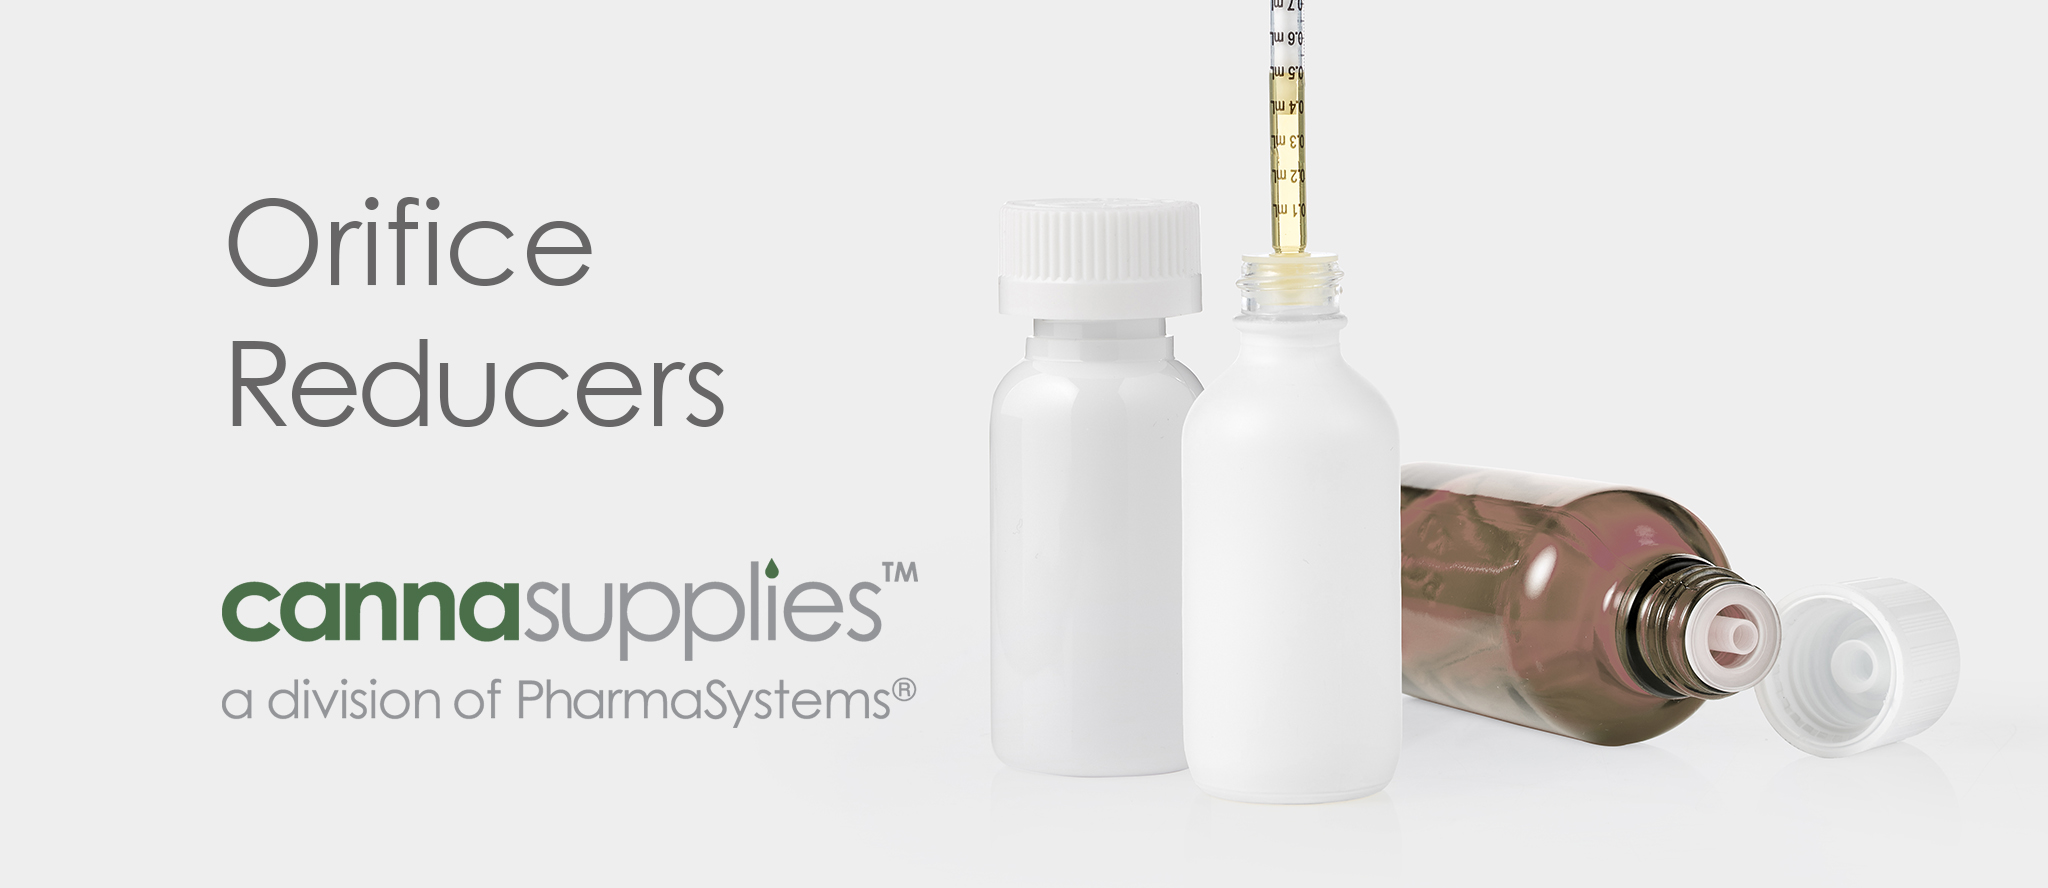 Orifice Reducer Solutions from Cannasupplies